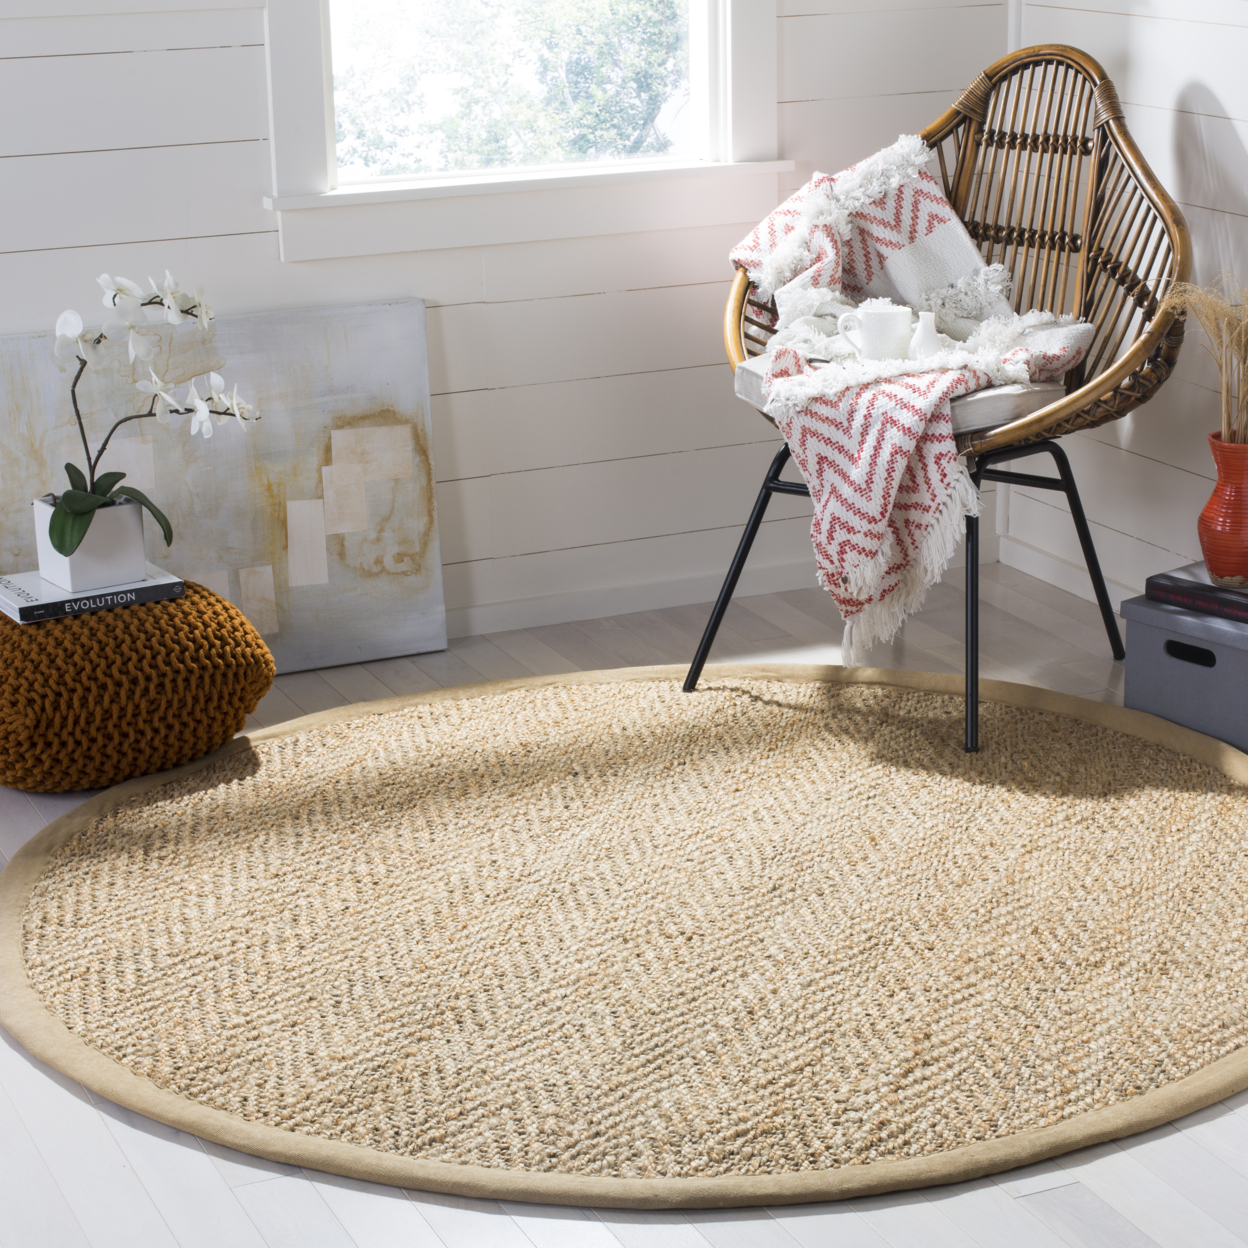 SAFAVIEH Natural Fiber Collection NF263A Natural Rug - 6' Square